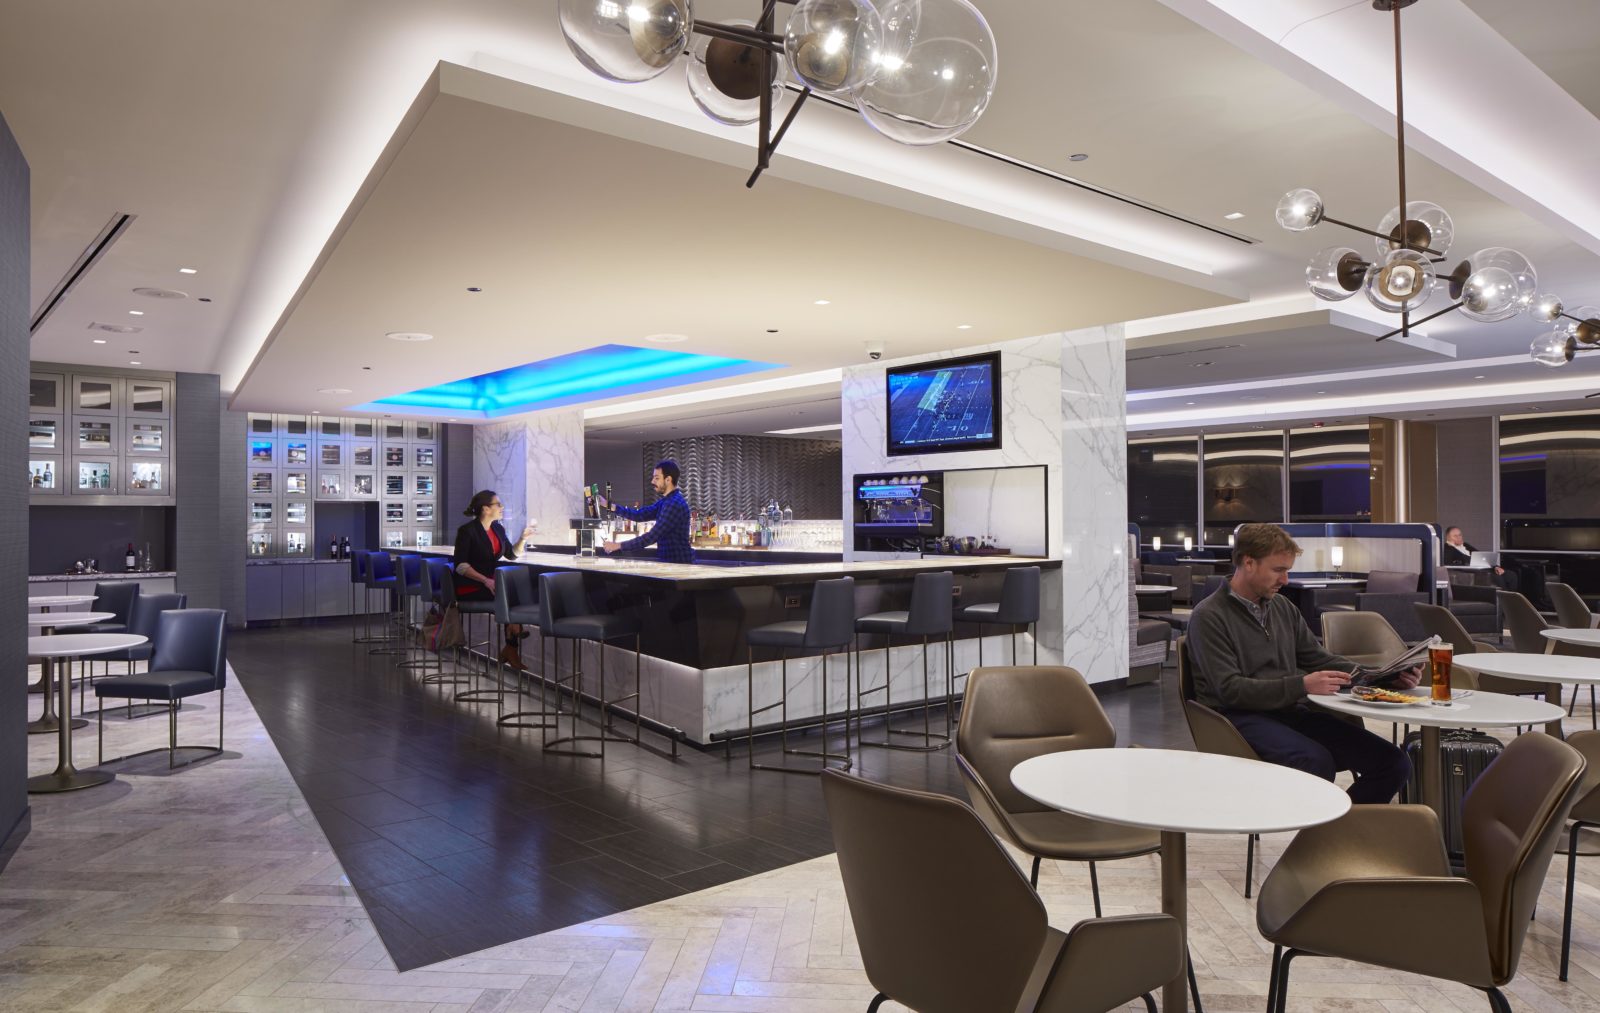 United Polaris Lounges: Taking Air Travel to Luxurious New Heights